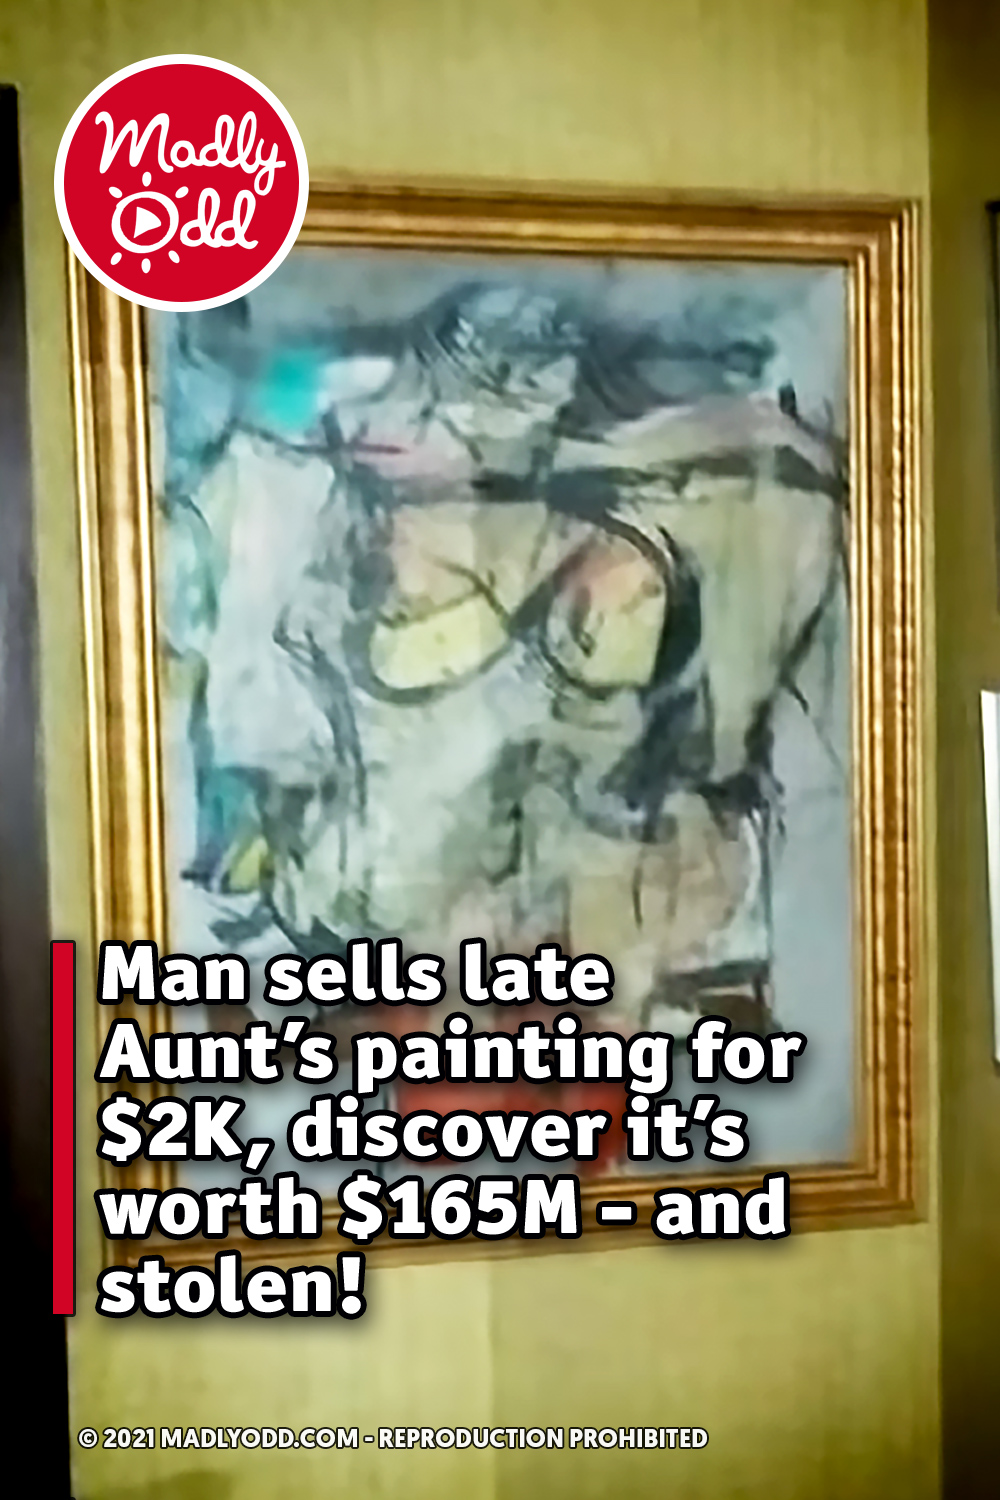 Man sells late Aunt’s painting for $2K, discover it’s worth $165M - and stolen!